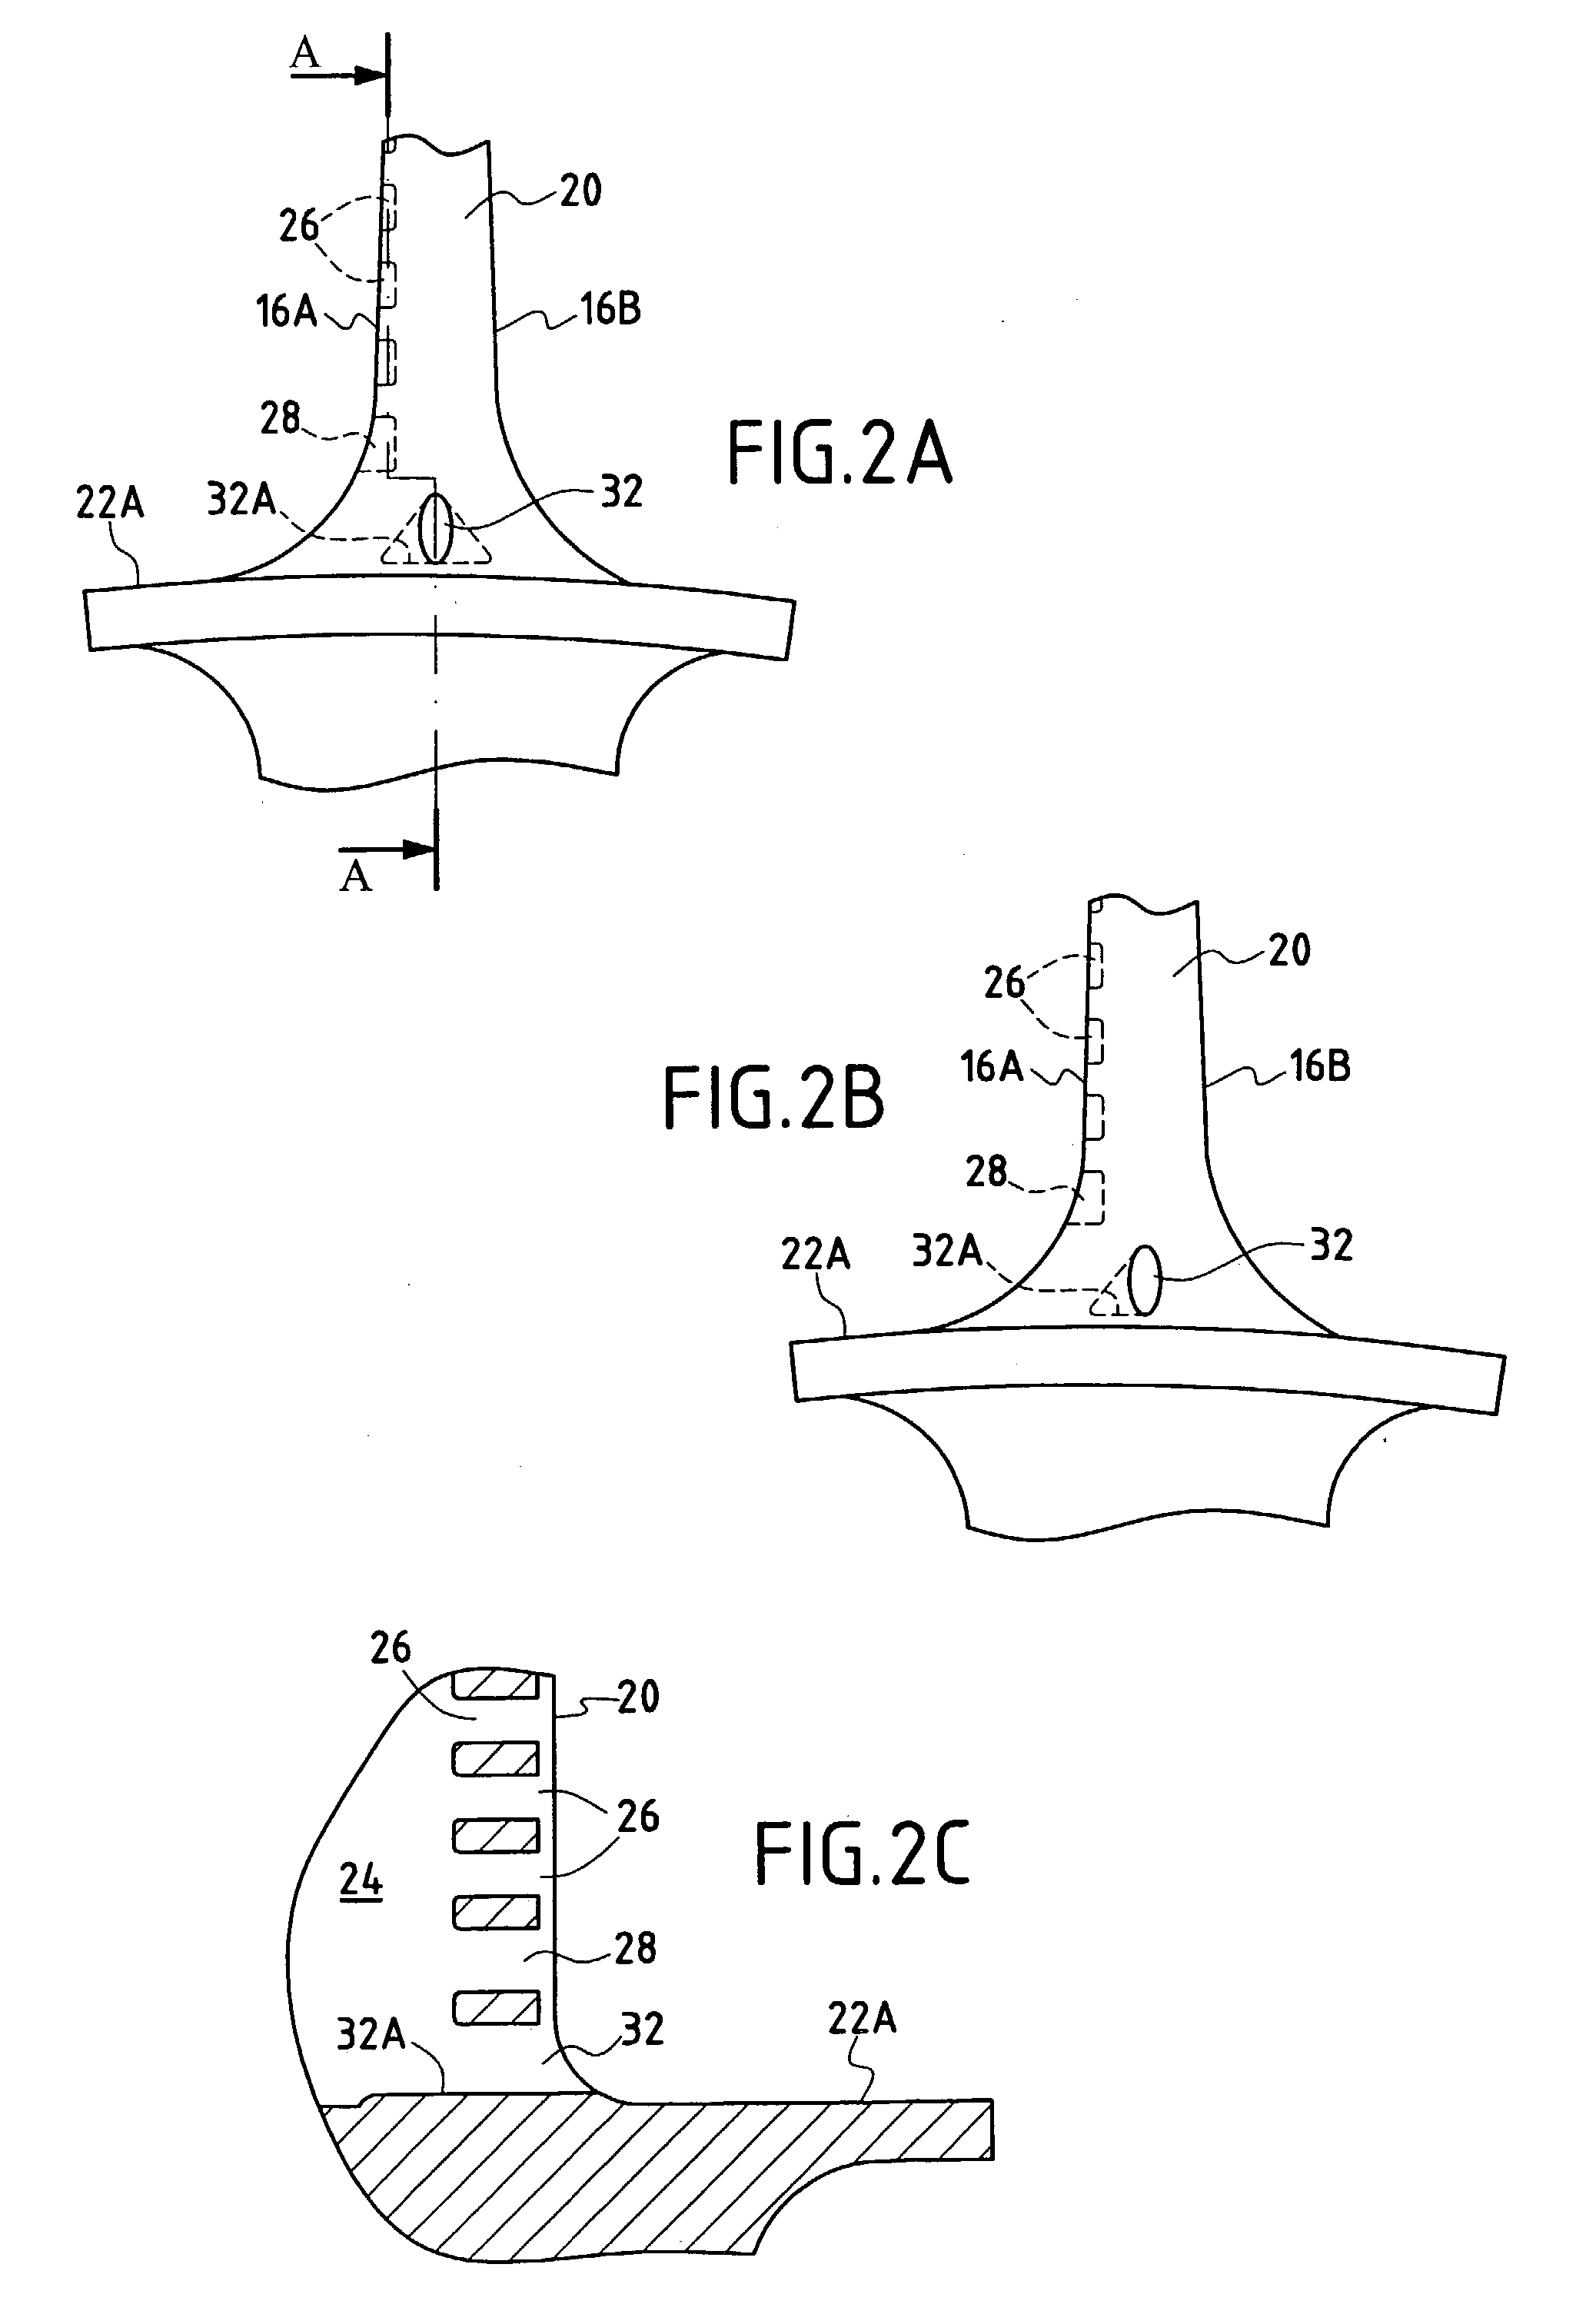 Moving blade for a high pressure turbine, the blade having a trailing edge of improved thermal behavior